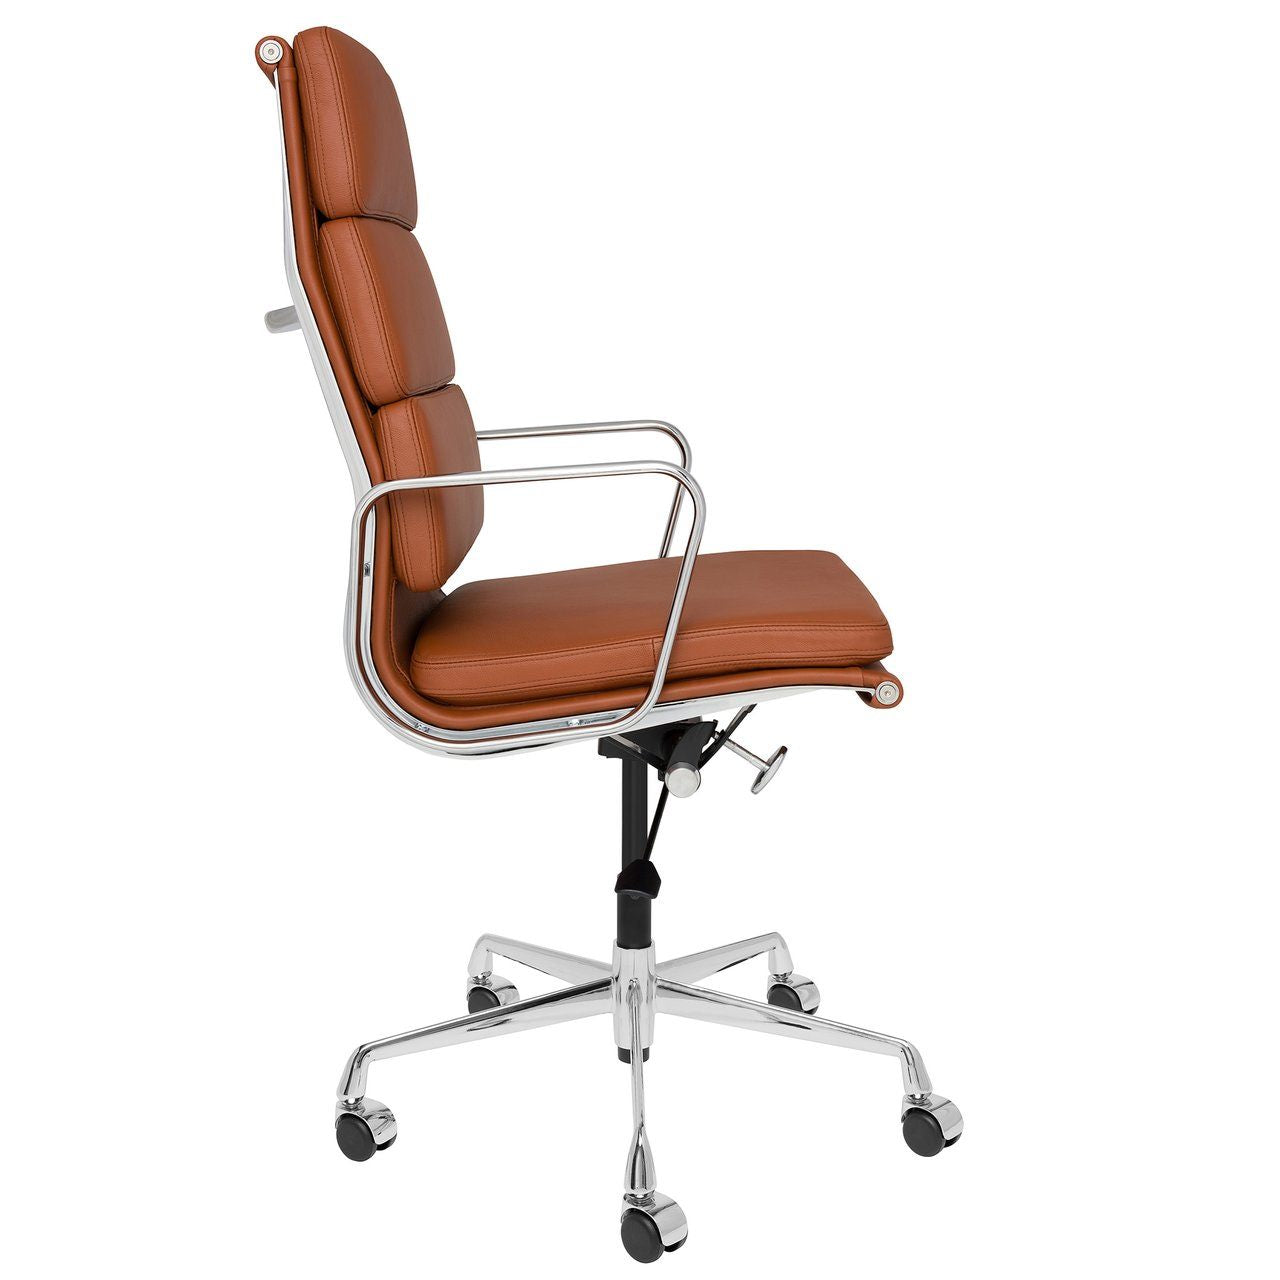 Eames Replica Soft Pad Office Chair - High Back Tan color by order.